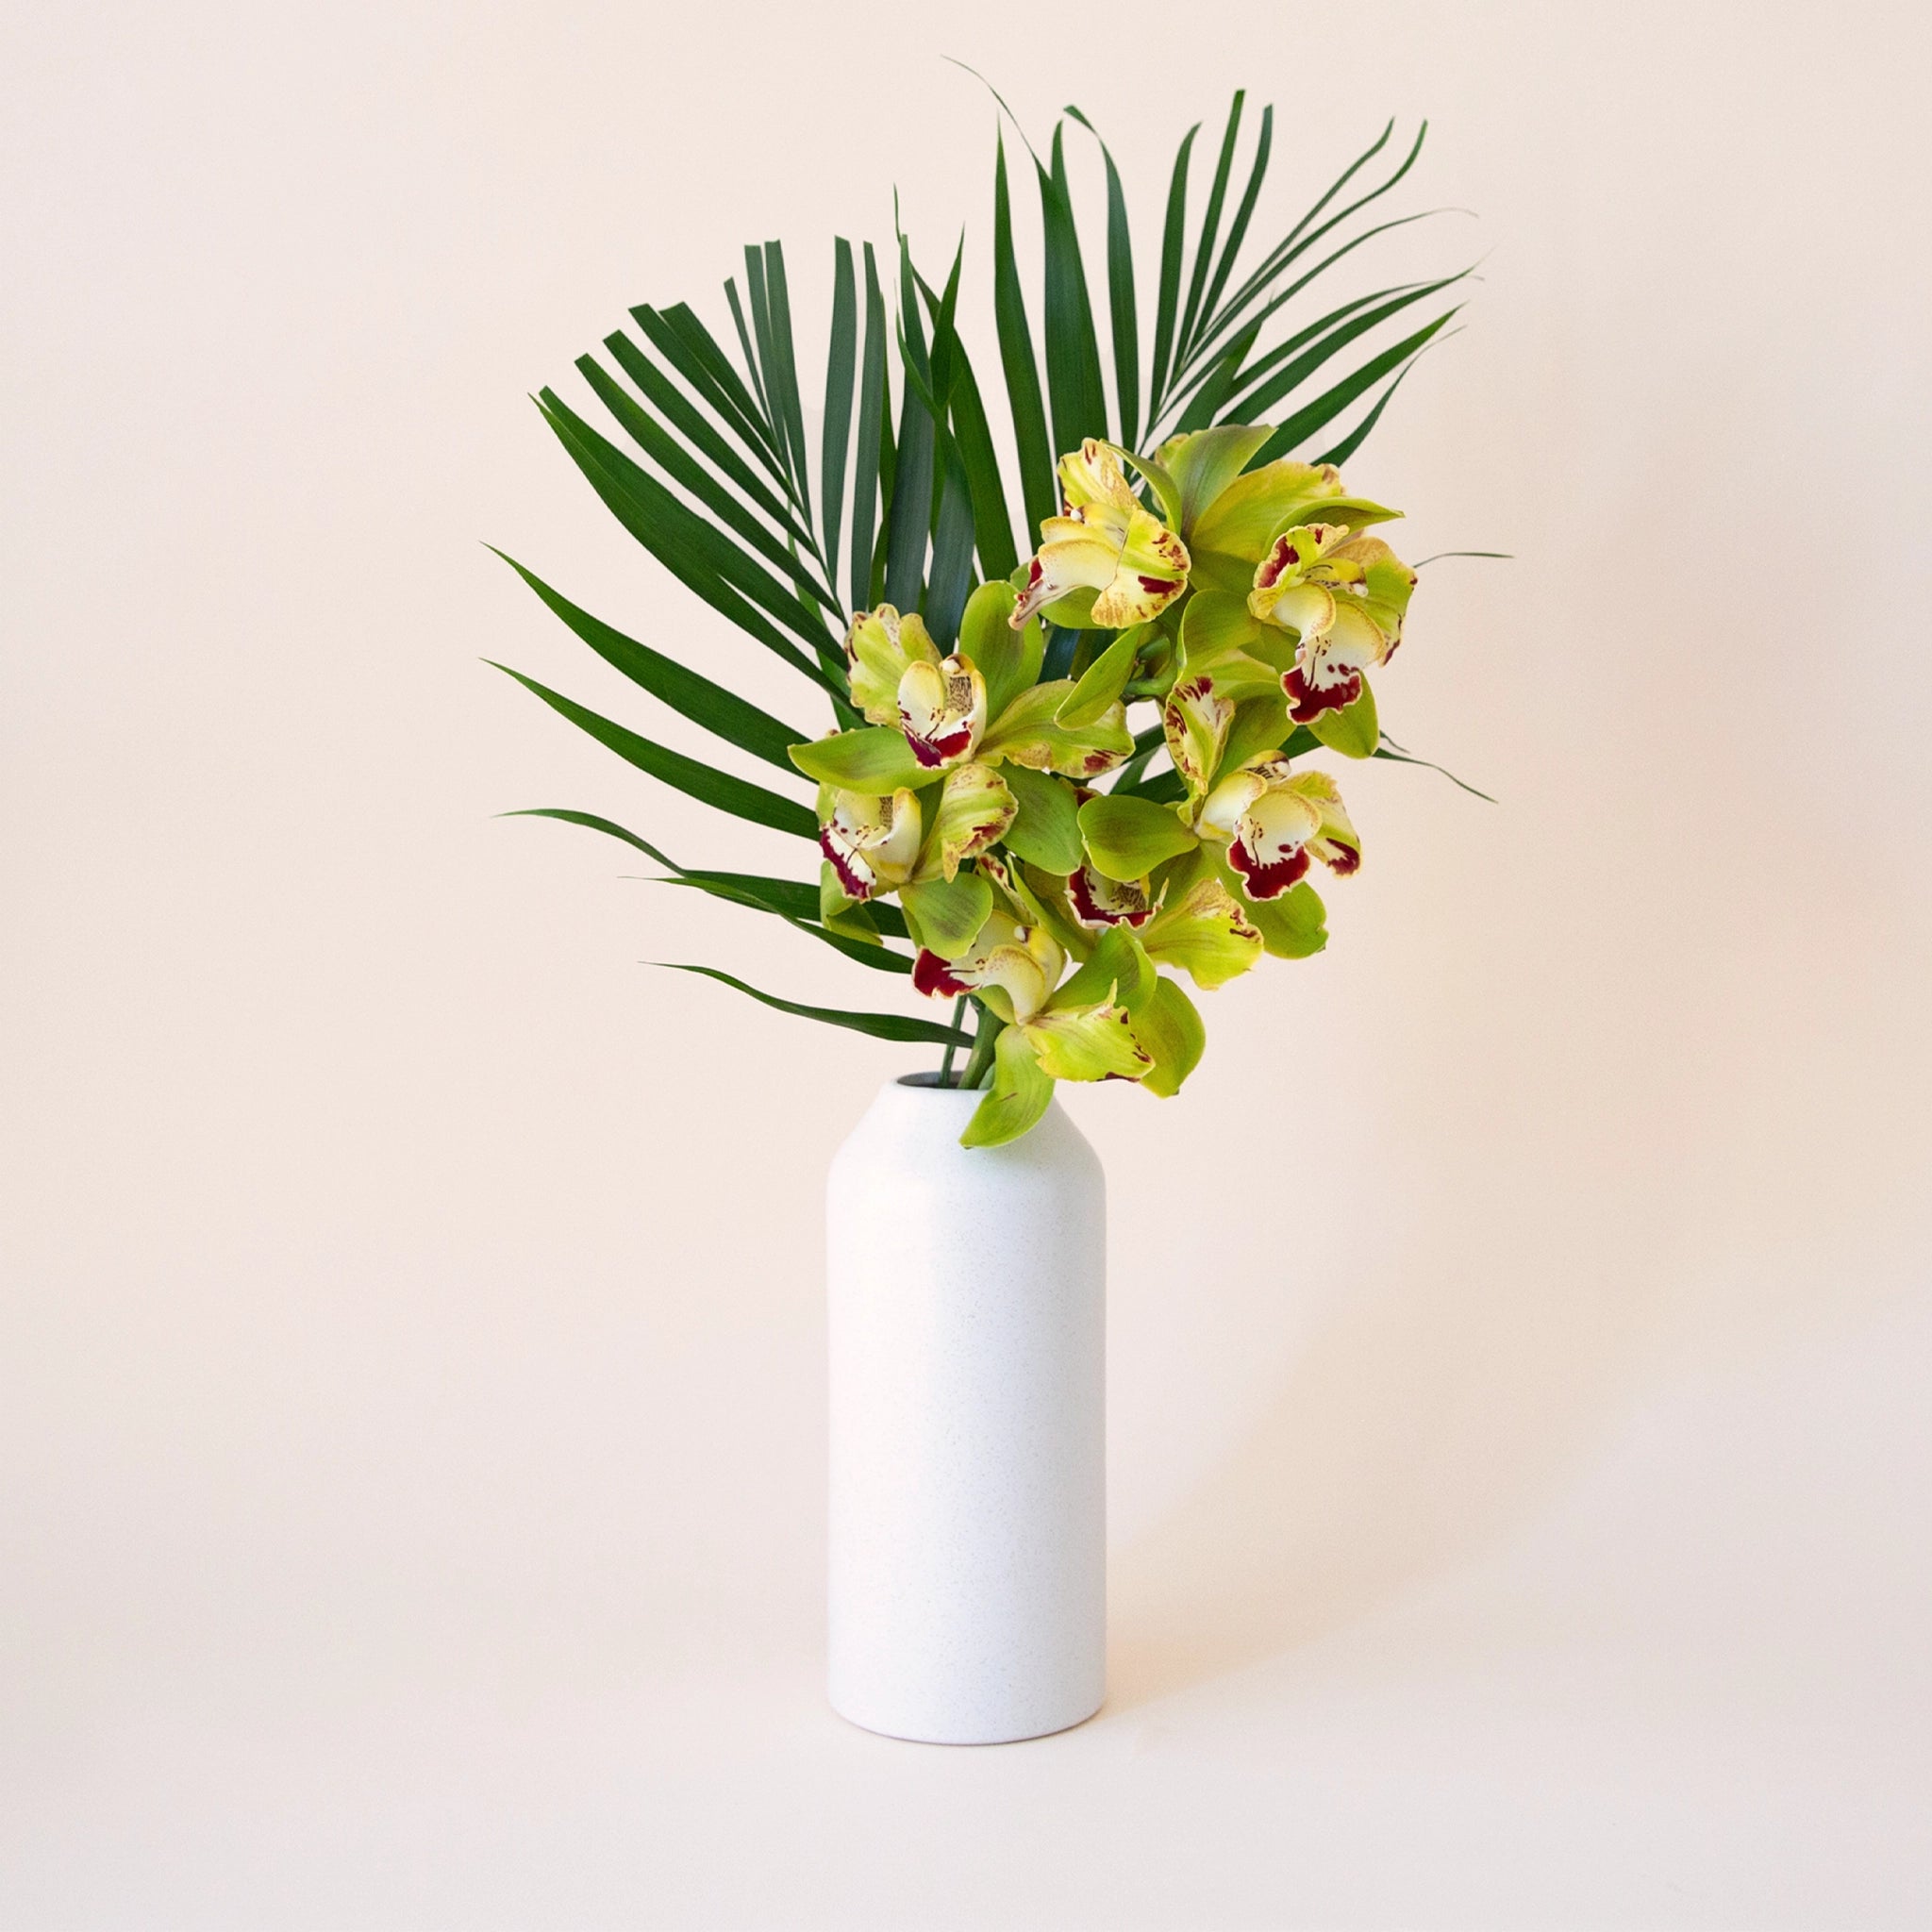 On a cream background is a white ceramic vase with an opening at the top and staged with tropical flowers.